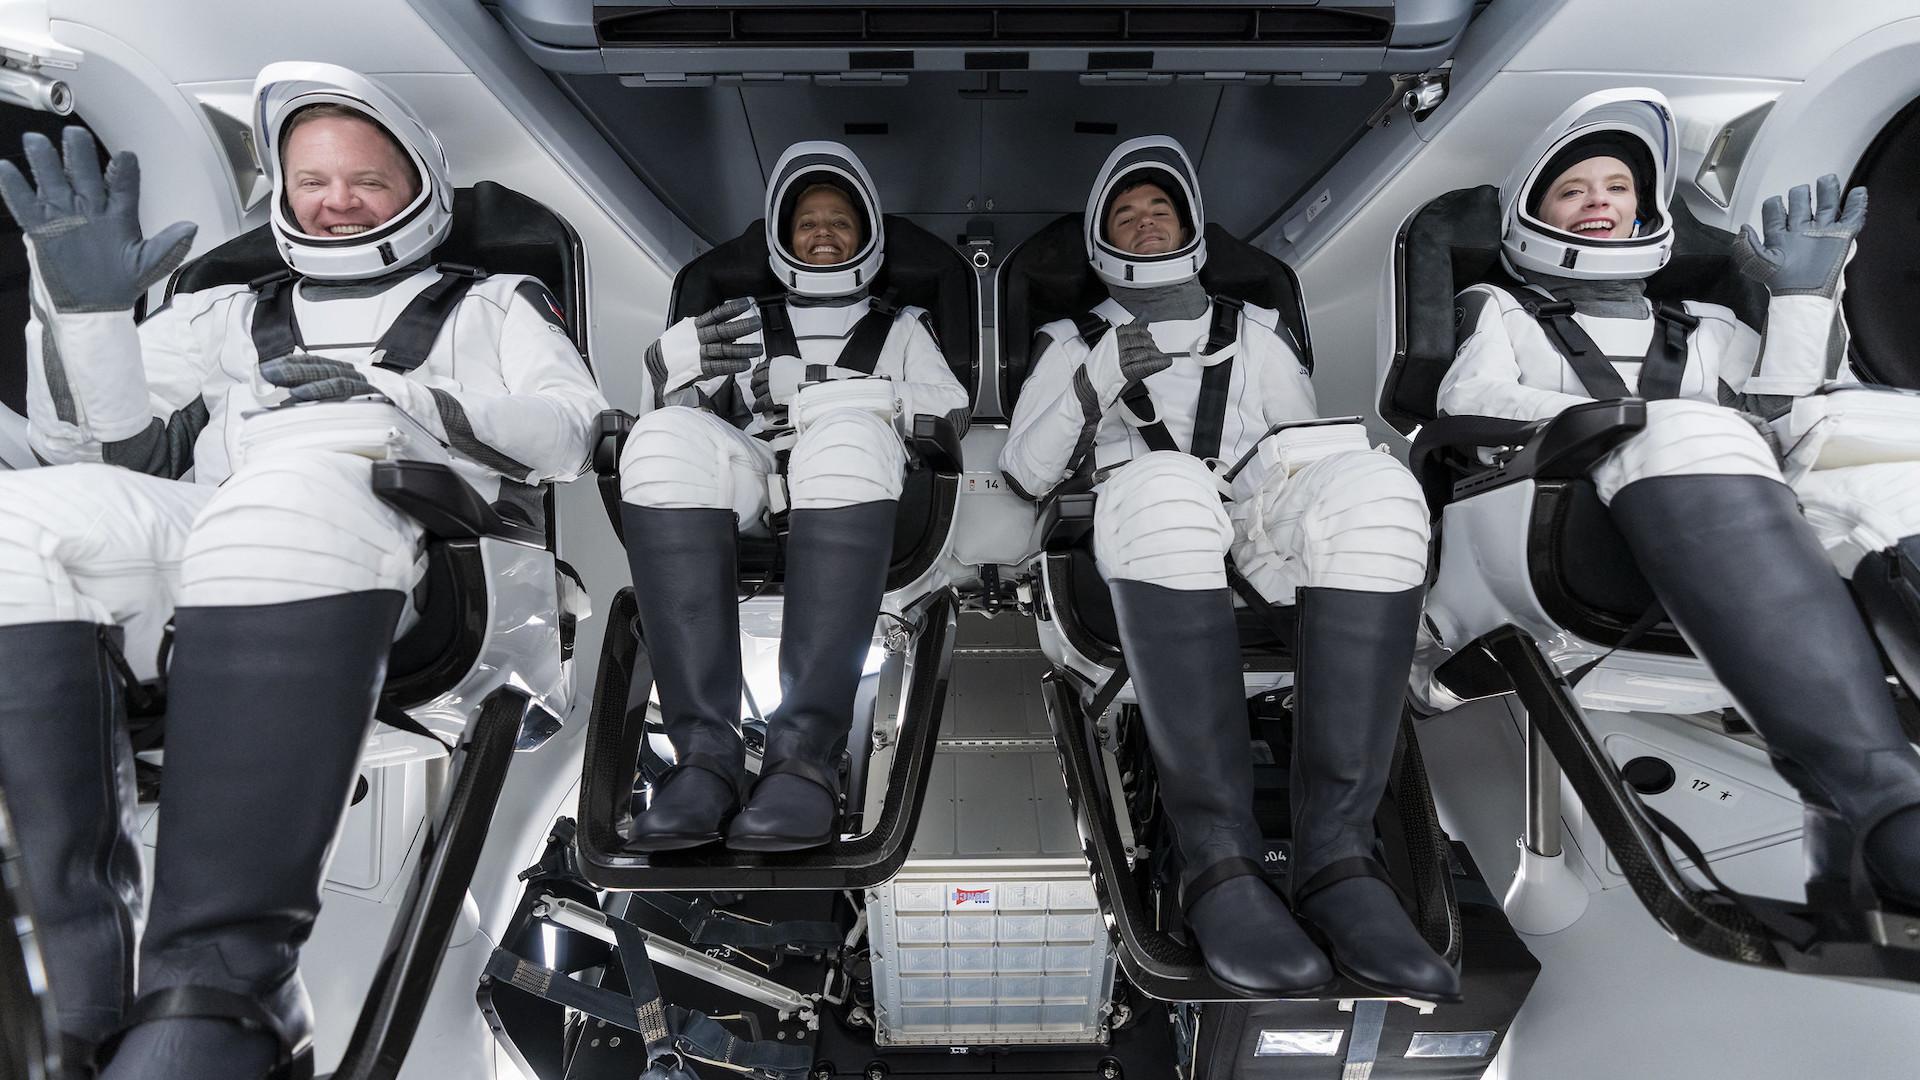  Even a 'weekend getaway' to space can alter astronauts' biology, sweeping new studies find 